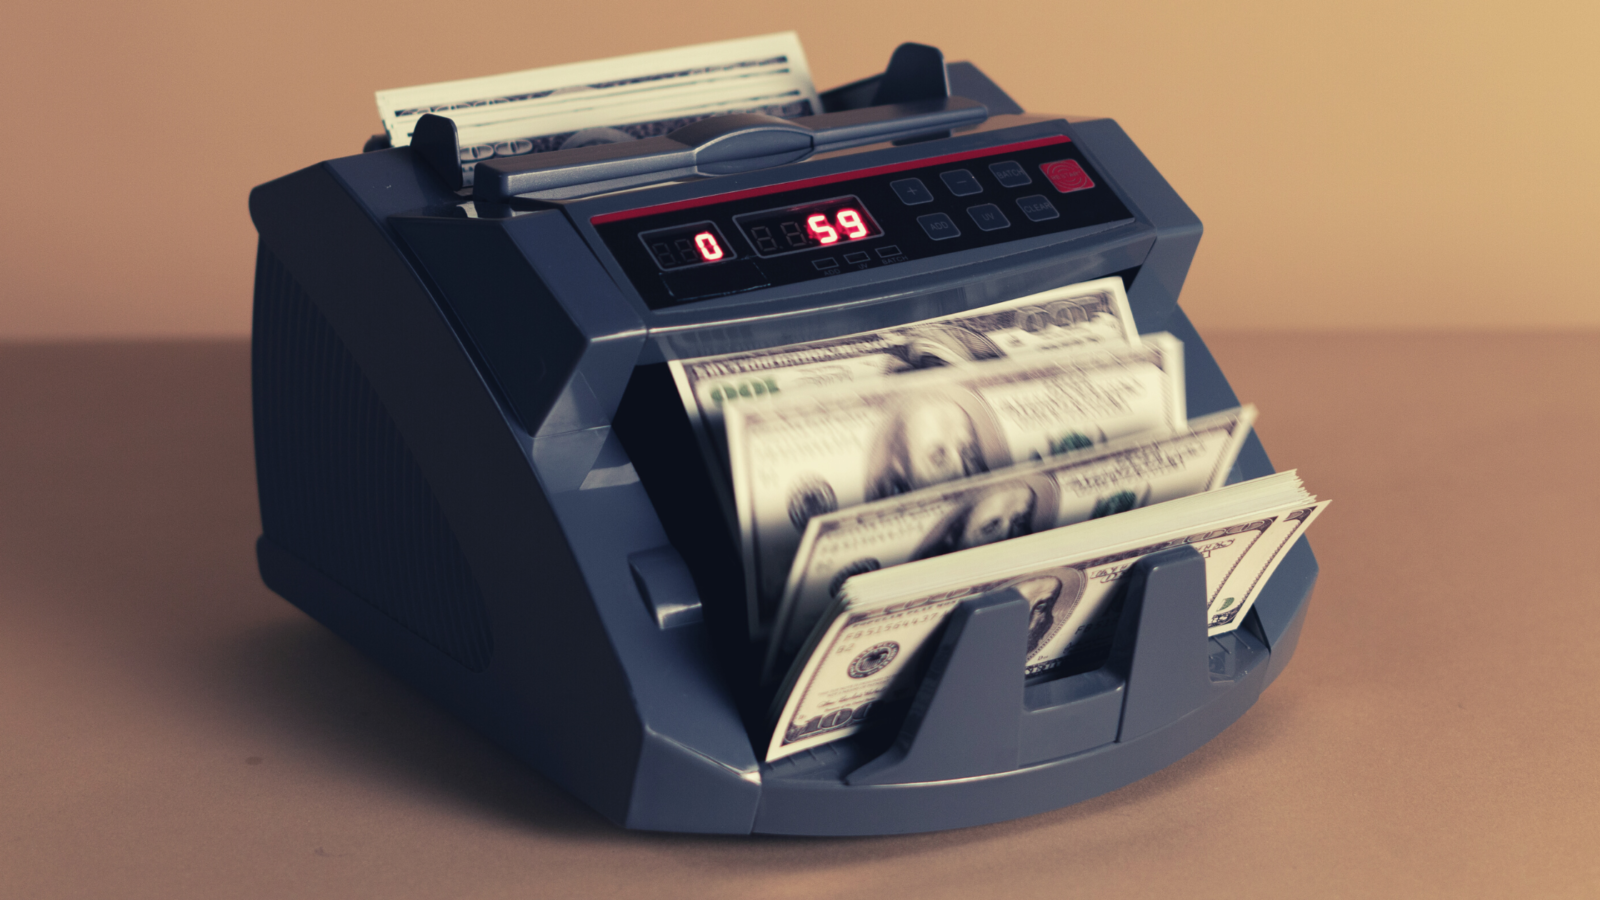 Best Portable Money Counter Machines to Buy